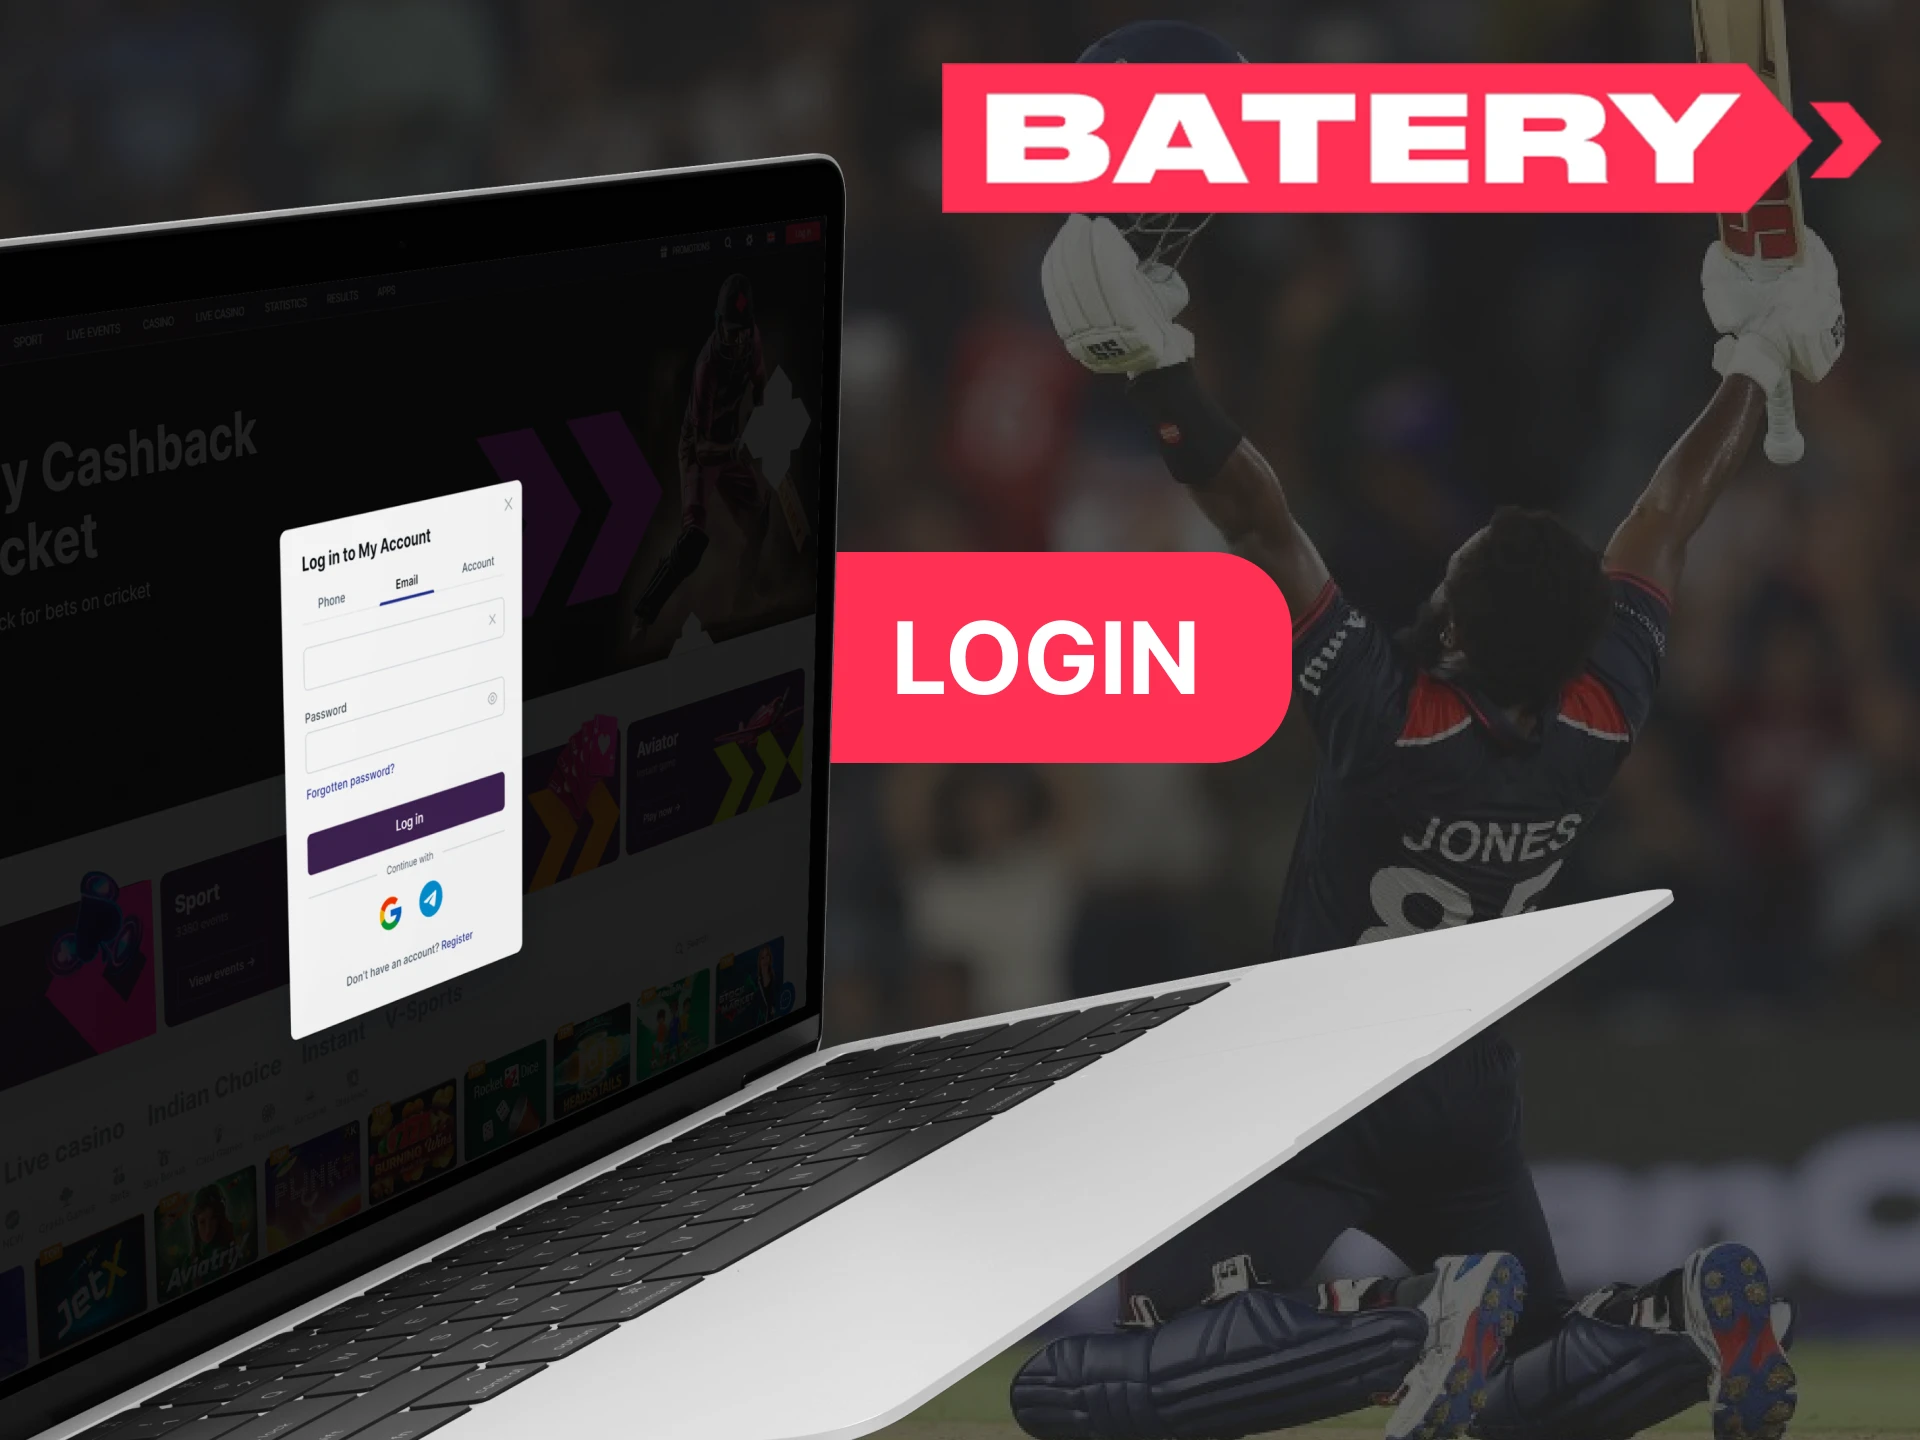 Login to your Batery account quickly and easily.